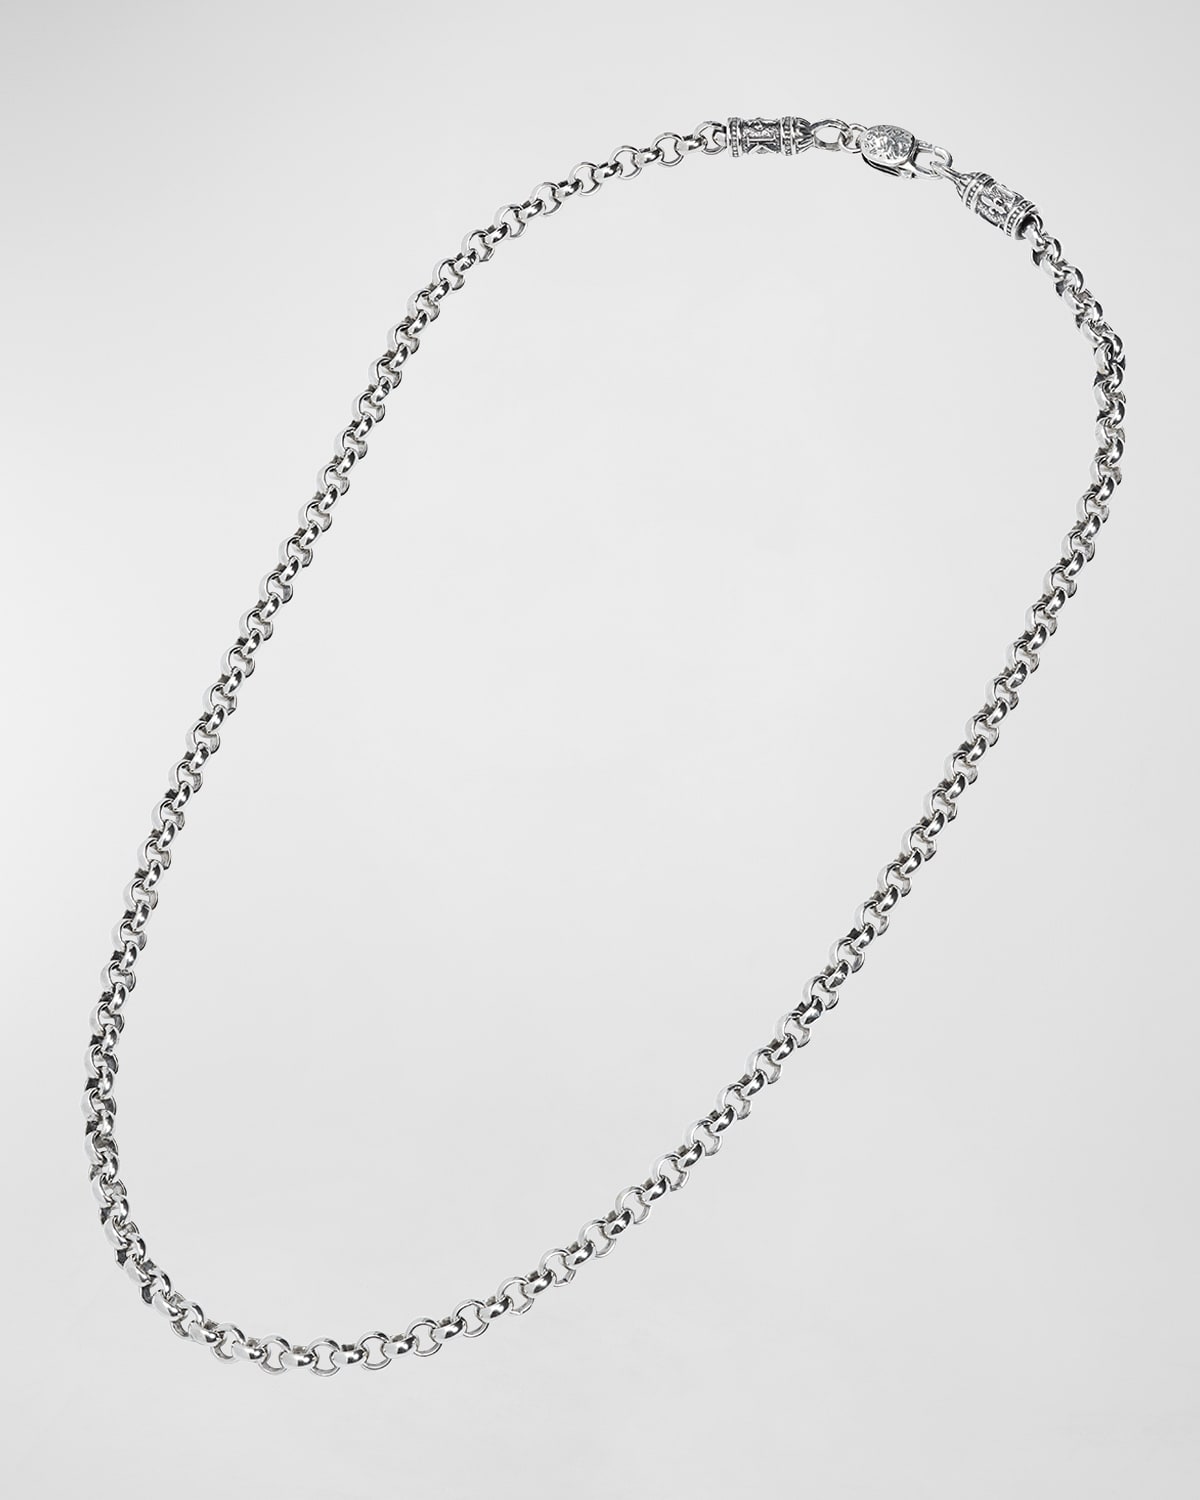 Men's Sterling Silver Cable Chain Necklace, 24"L